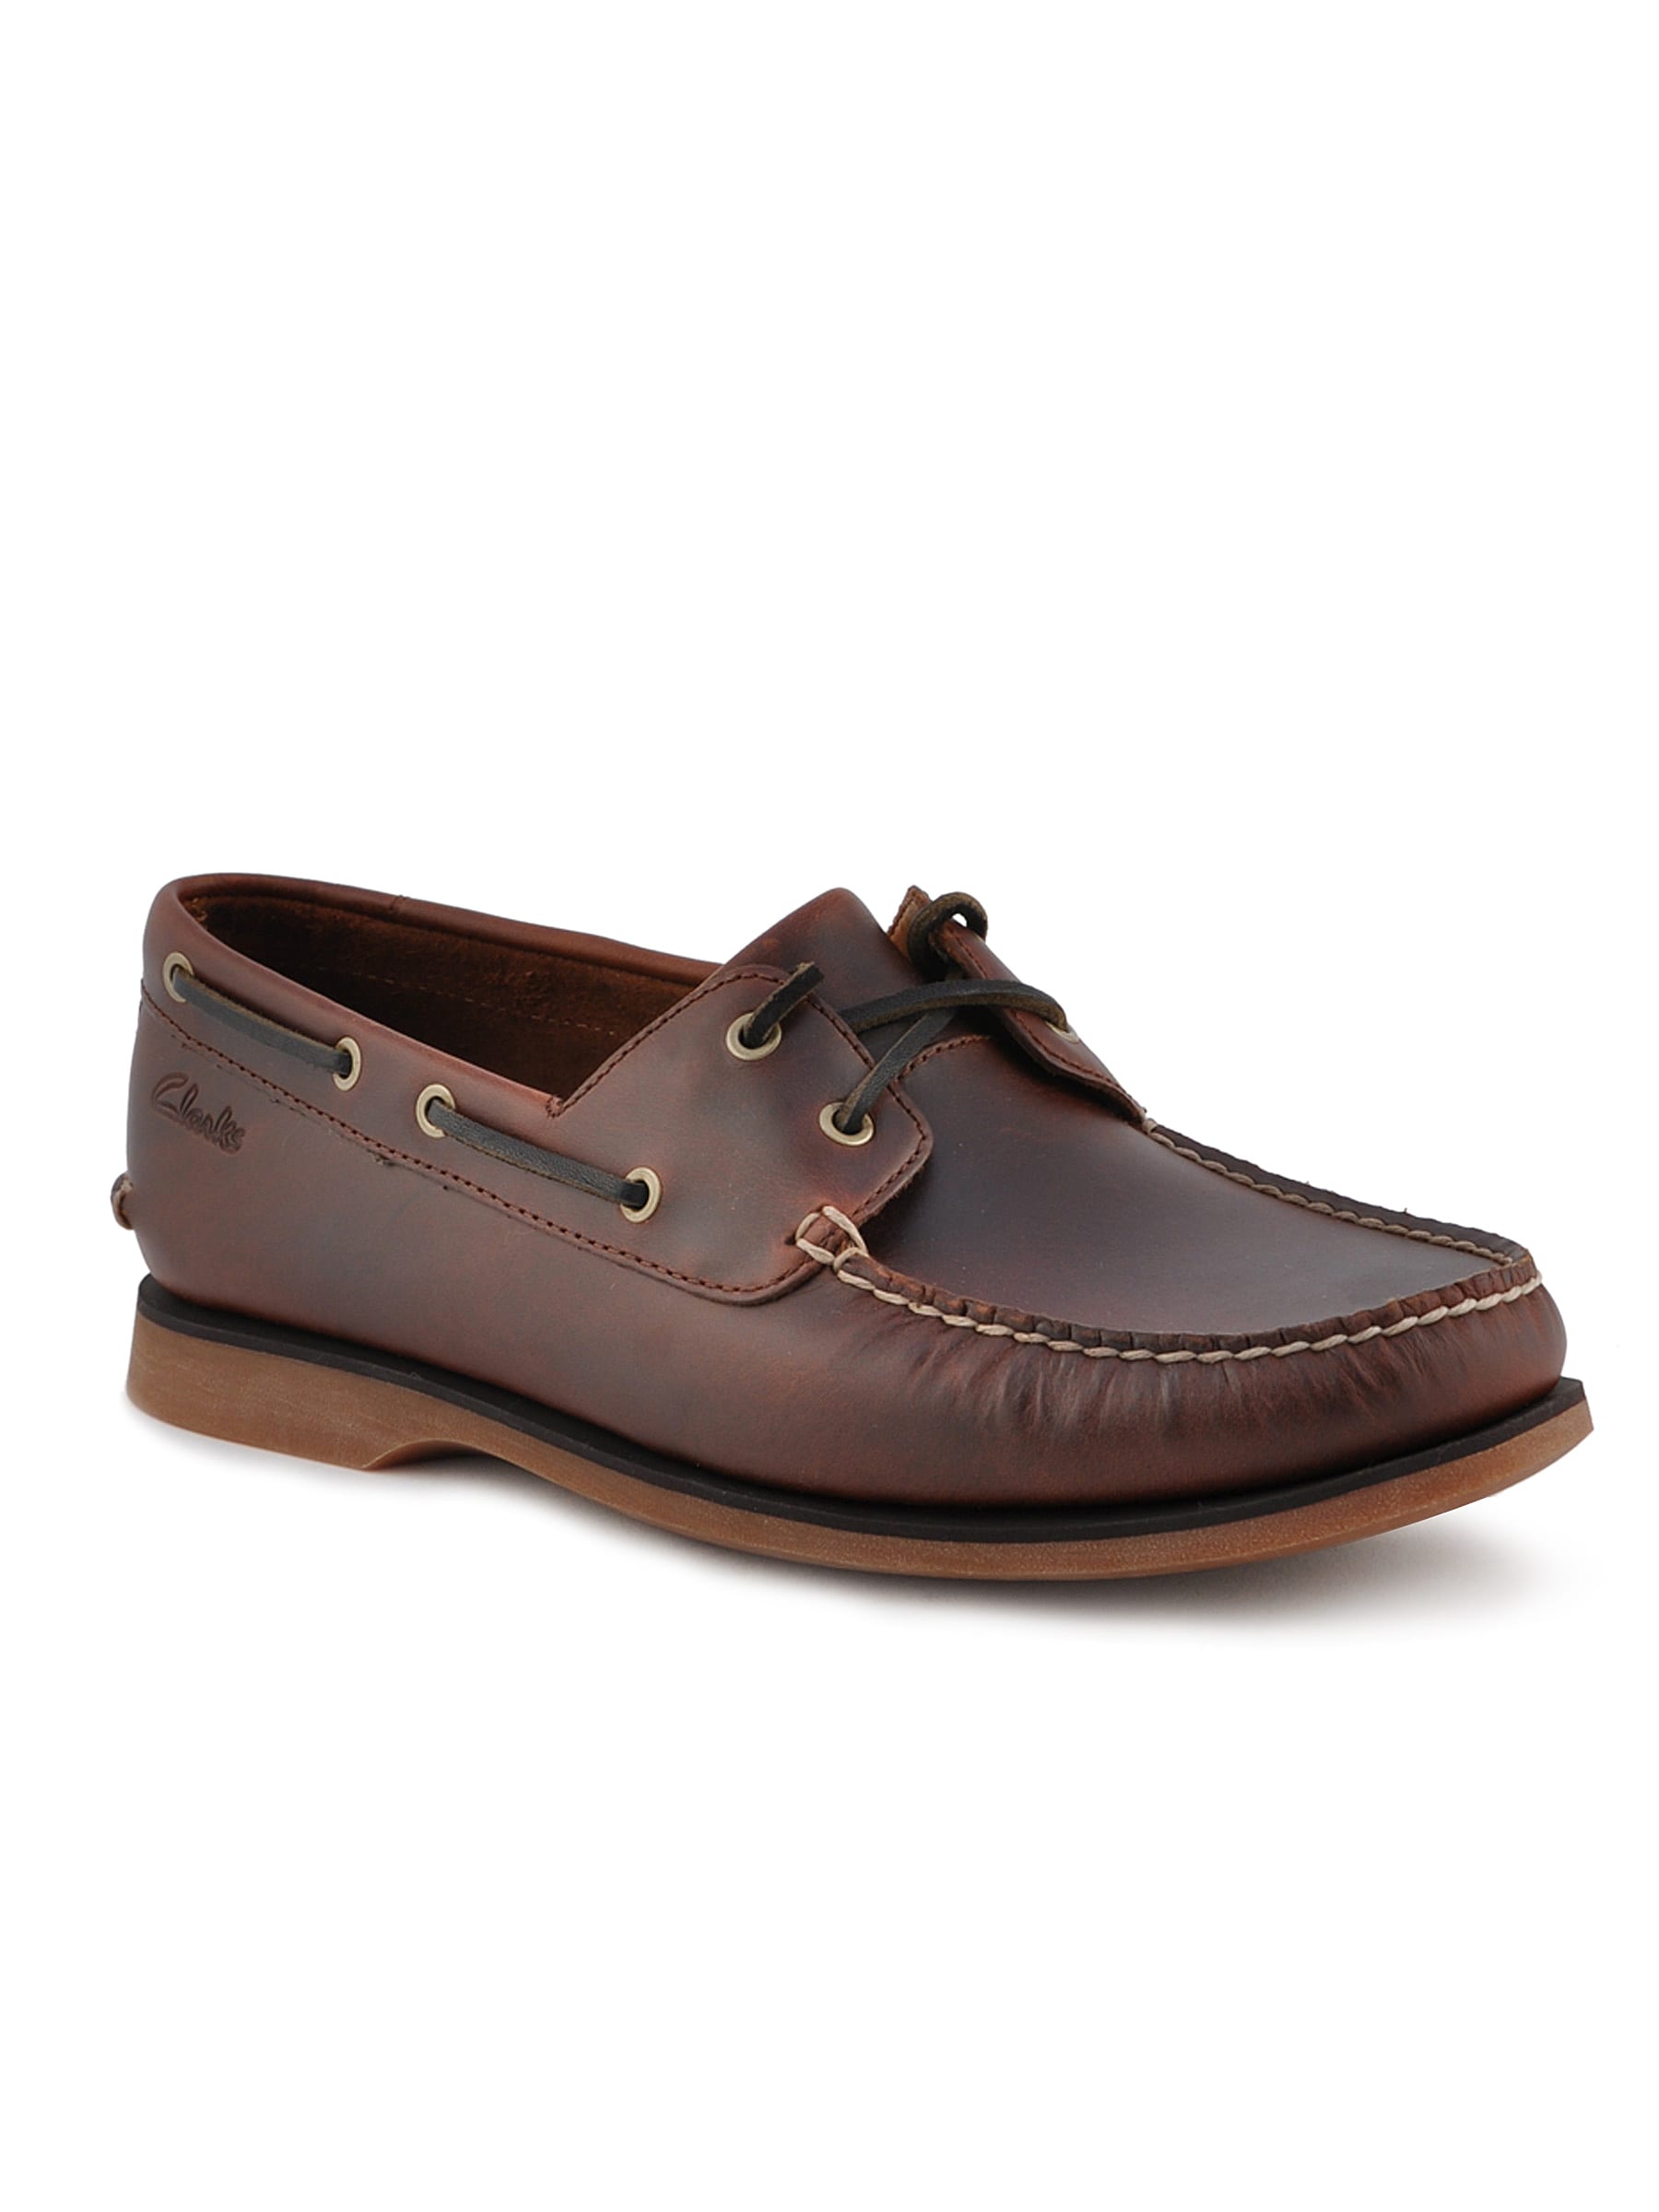 Clarks Men Brown Leather Boat Shoes